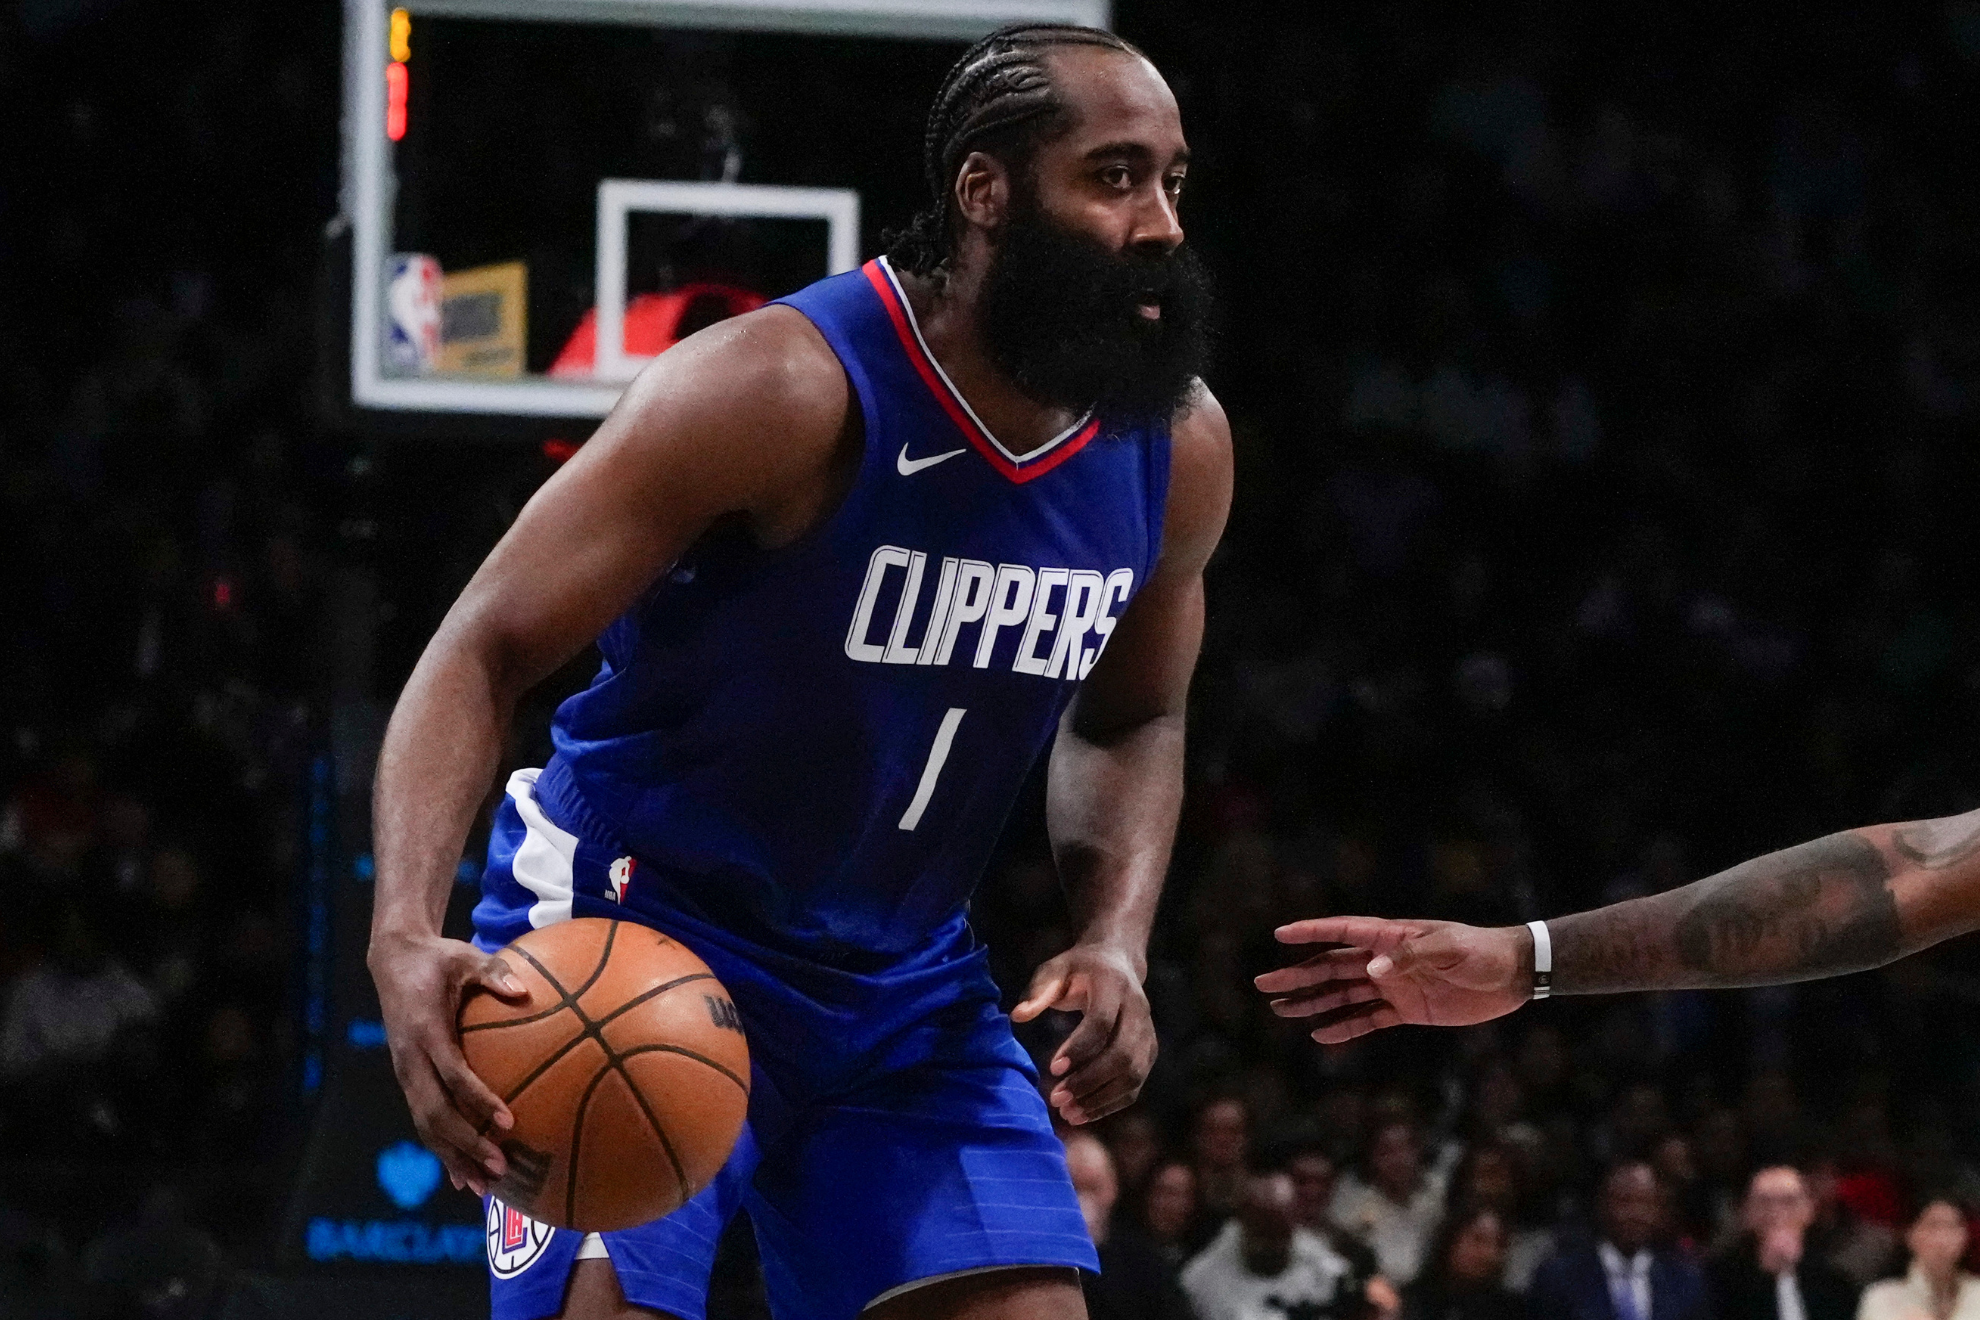 The Clippers have been outscored by 33 points with Harden on the floor.